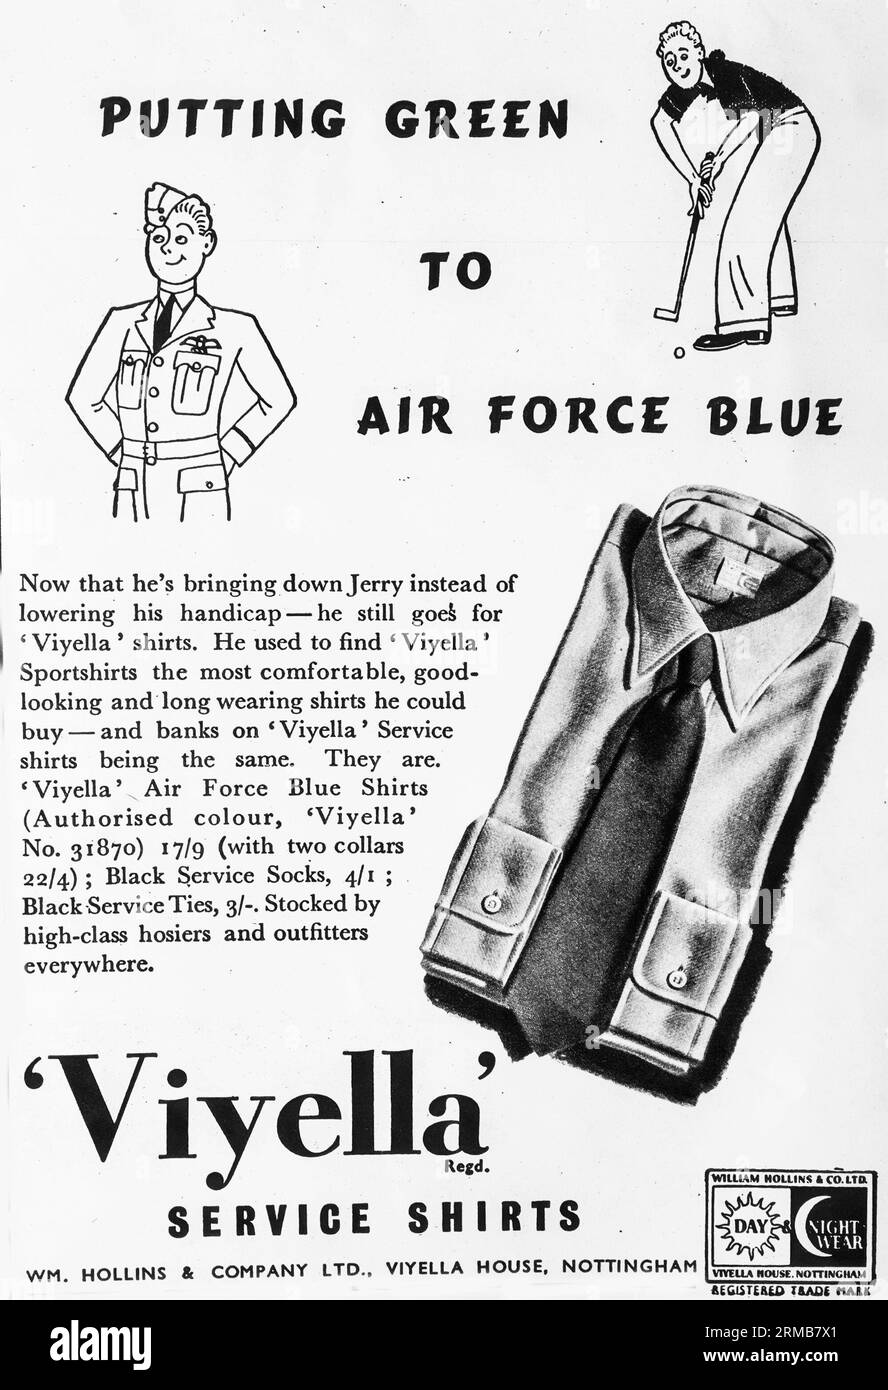 A 1941 wartime advertisement for mens Viyella Shirts, ‘stocked by high class hosiers and outfitters everywhere’. Developed by  William Hollins & Co in the 1890s, it was claimed to be  the first branded fabric in the world. The business has changed hands a number of times over the years. In 2009 it was acquired by Austin Reed. This advertisement is aimed at members of the armed forces with the shirts referred to as Air Force Blue. The advert also refers to Black Service Socks and Black Service Ties. Stock Photo